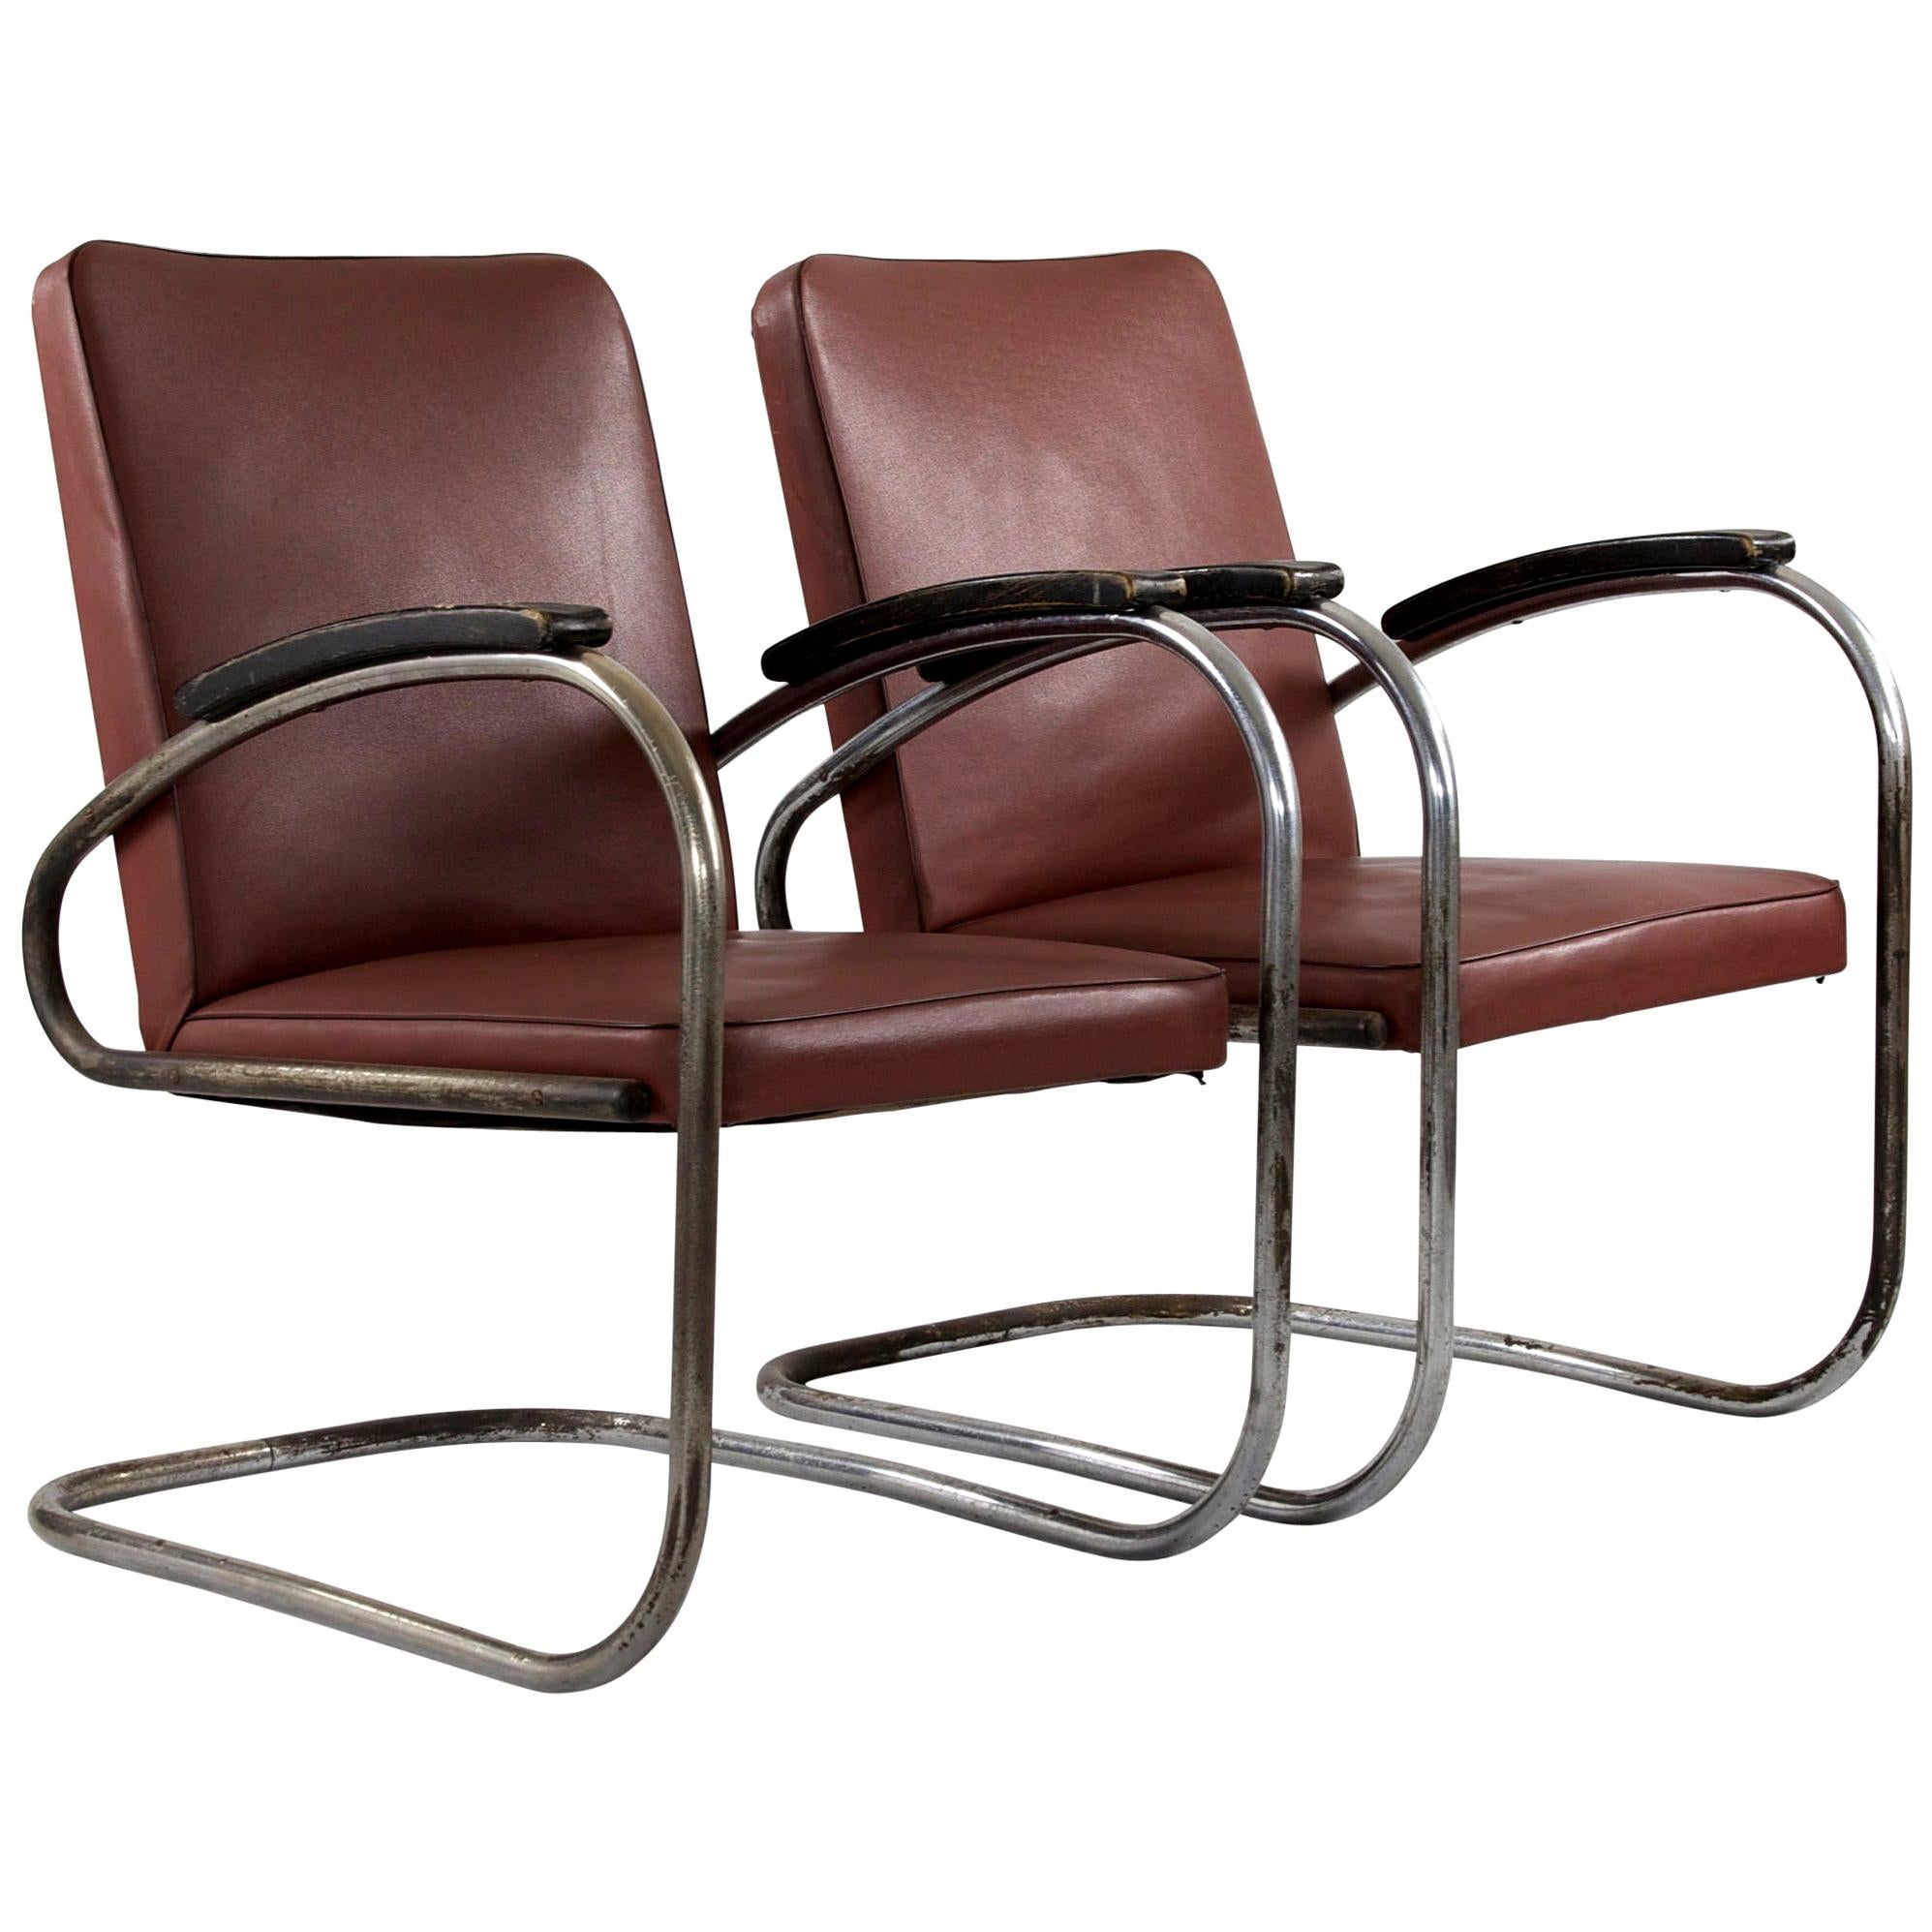 Cantilever "RS 7" Two Dark Red Faux Leather Chairs, Manufactured by Mauser